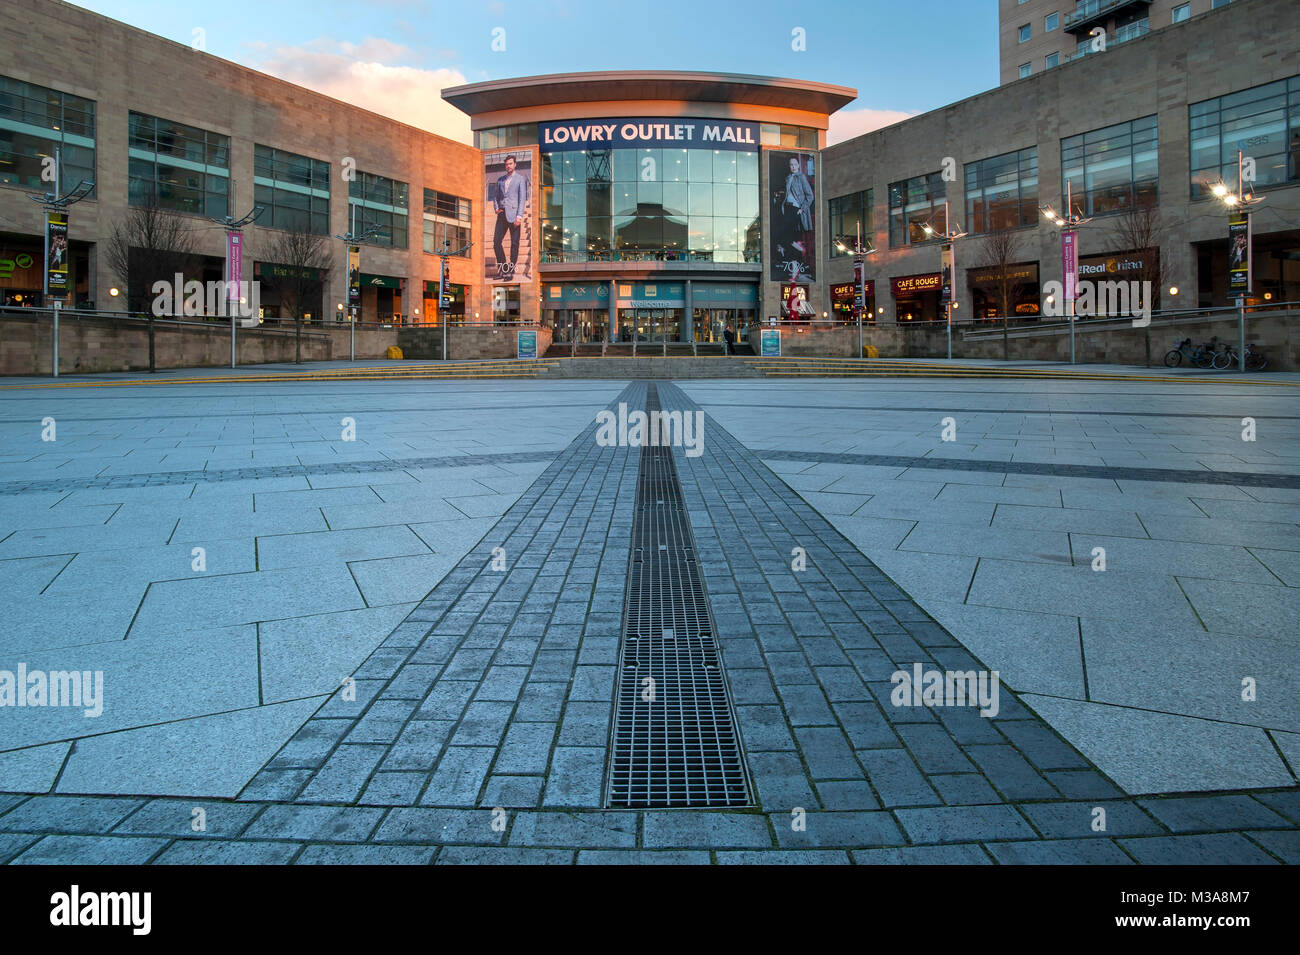 The Lowry Outlet Mall, Salford Quays, Greater Manchester, England, UK Stock Photo